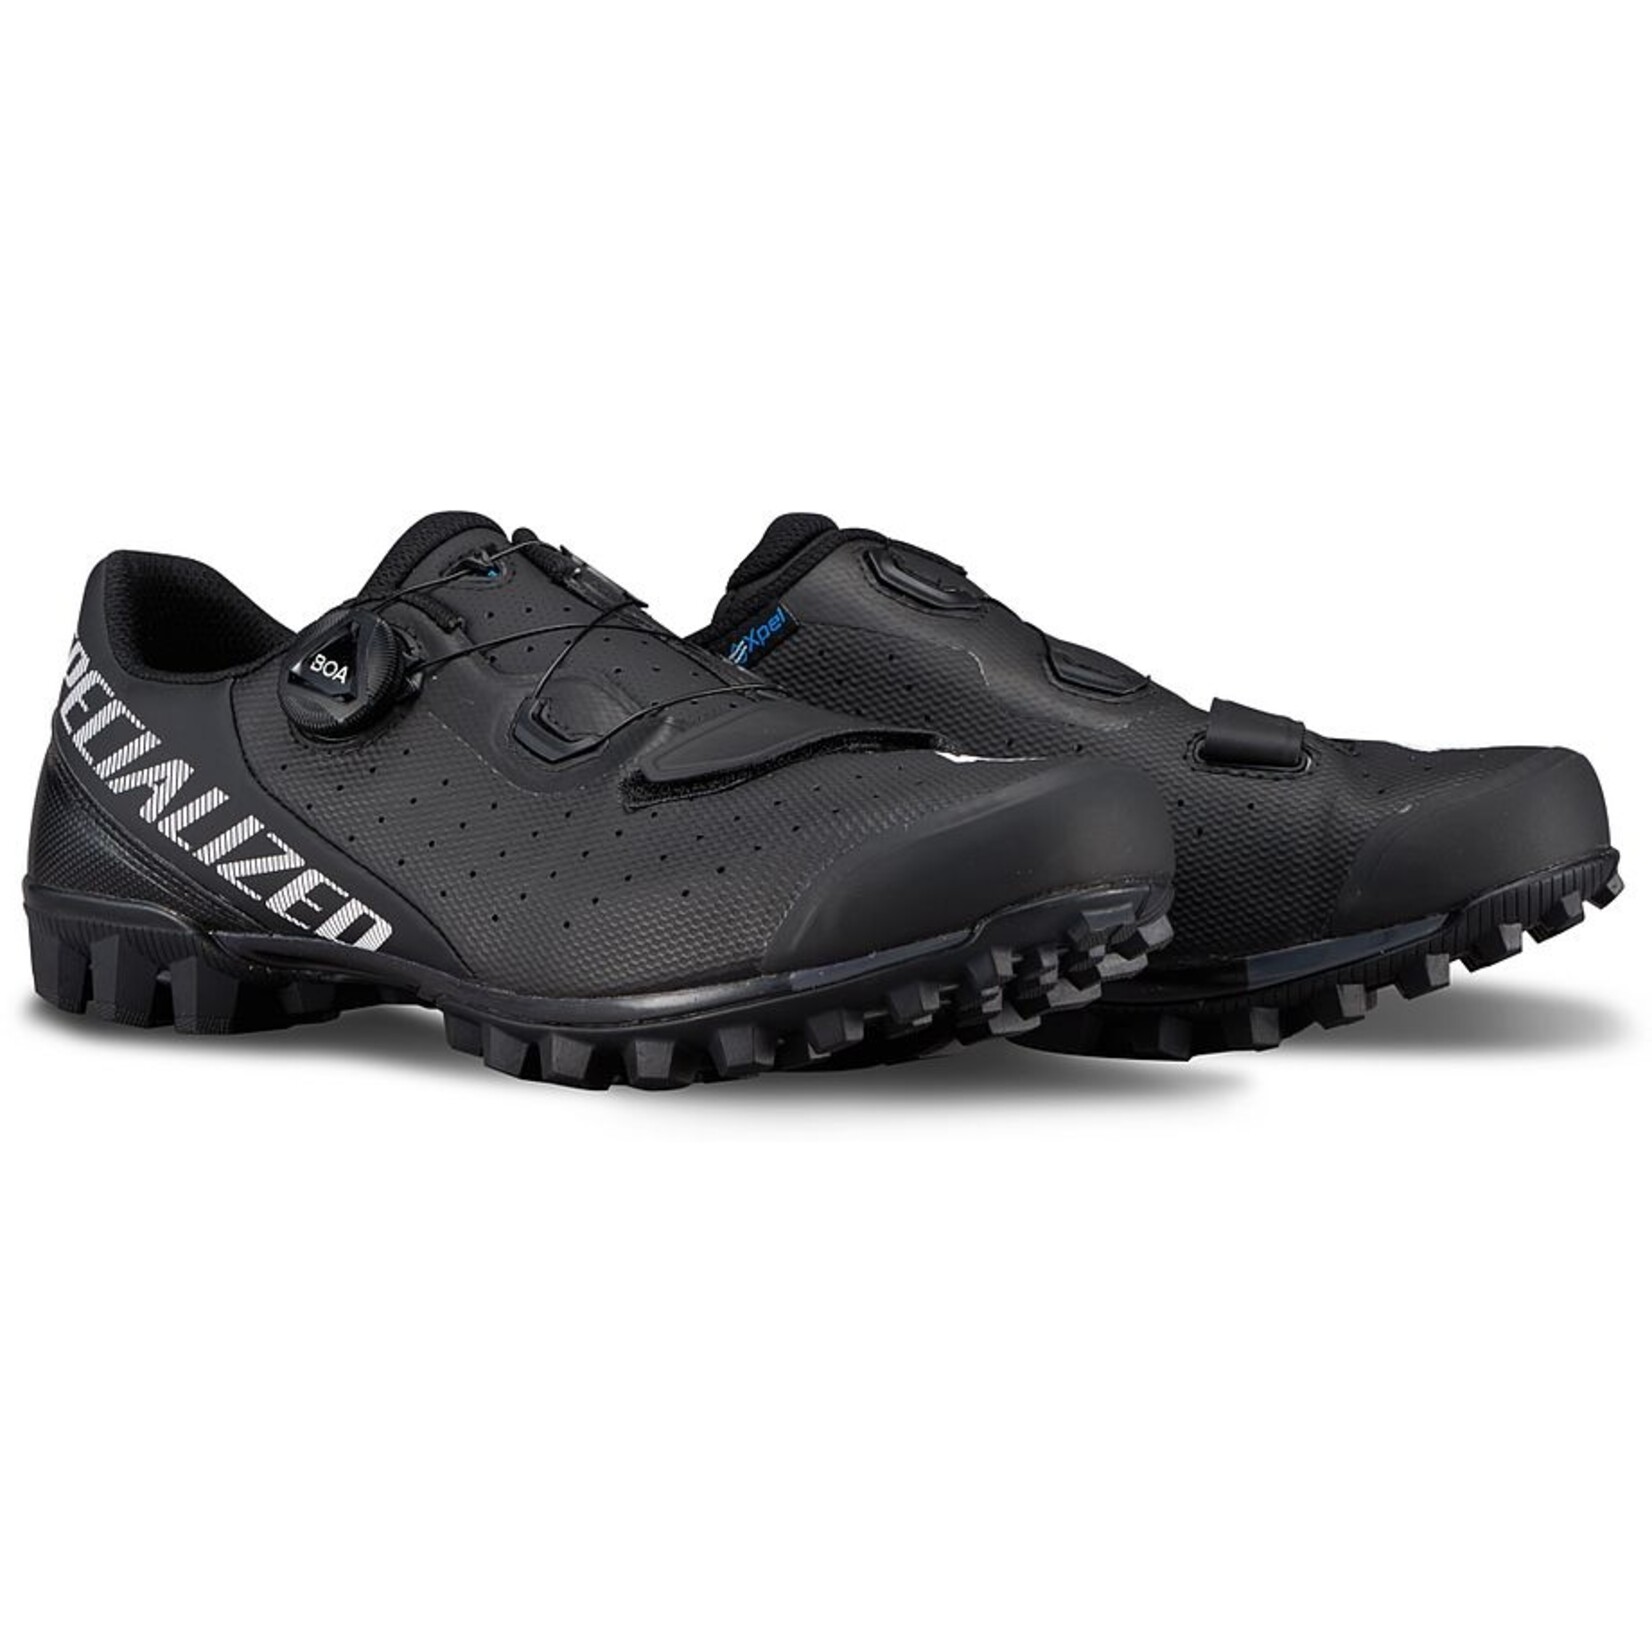 Specialized Recon 2.0 Mountain Bike Shoes in Black